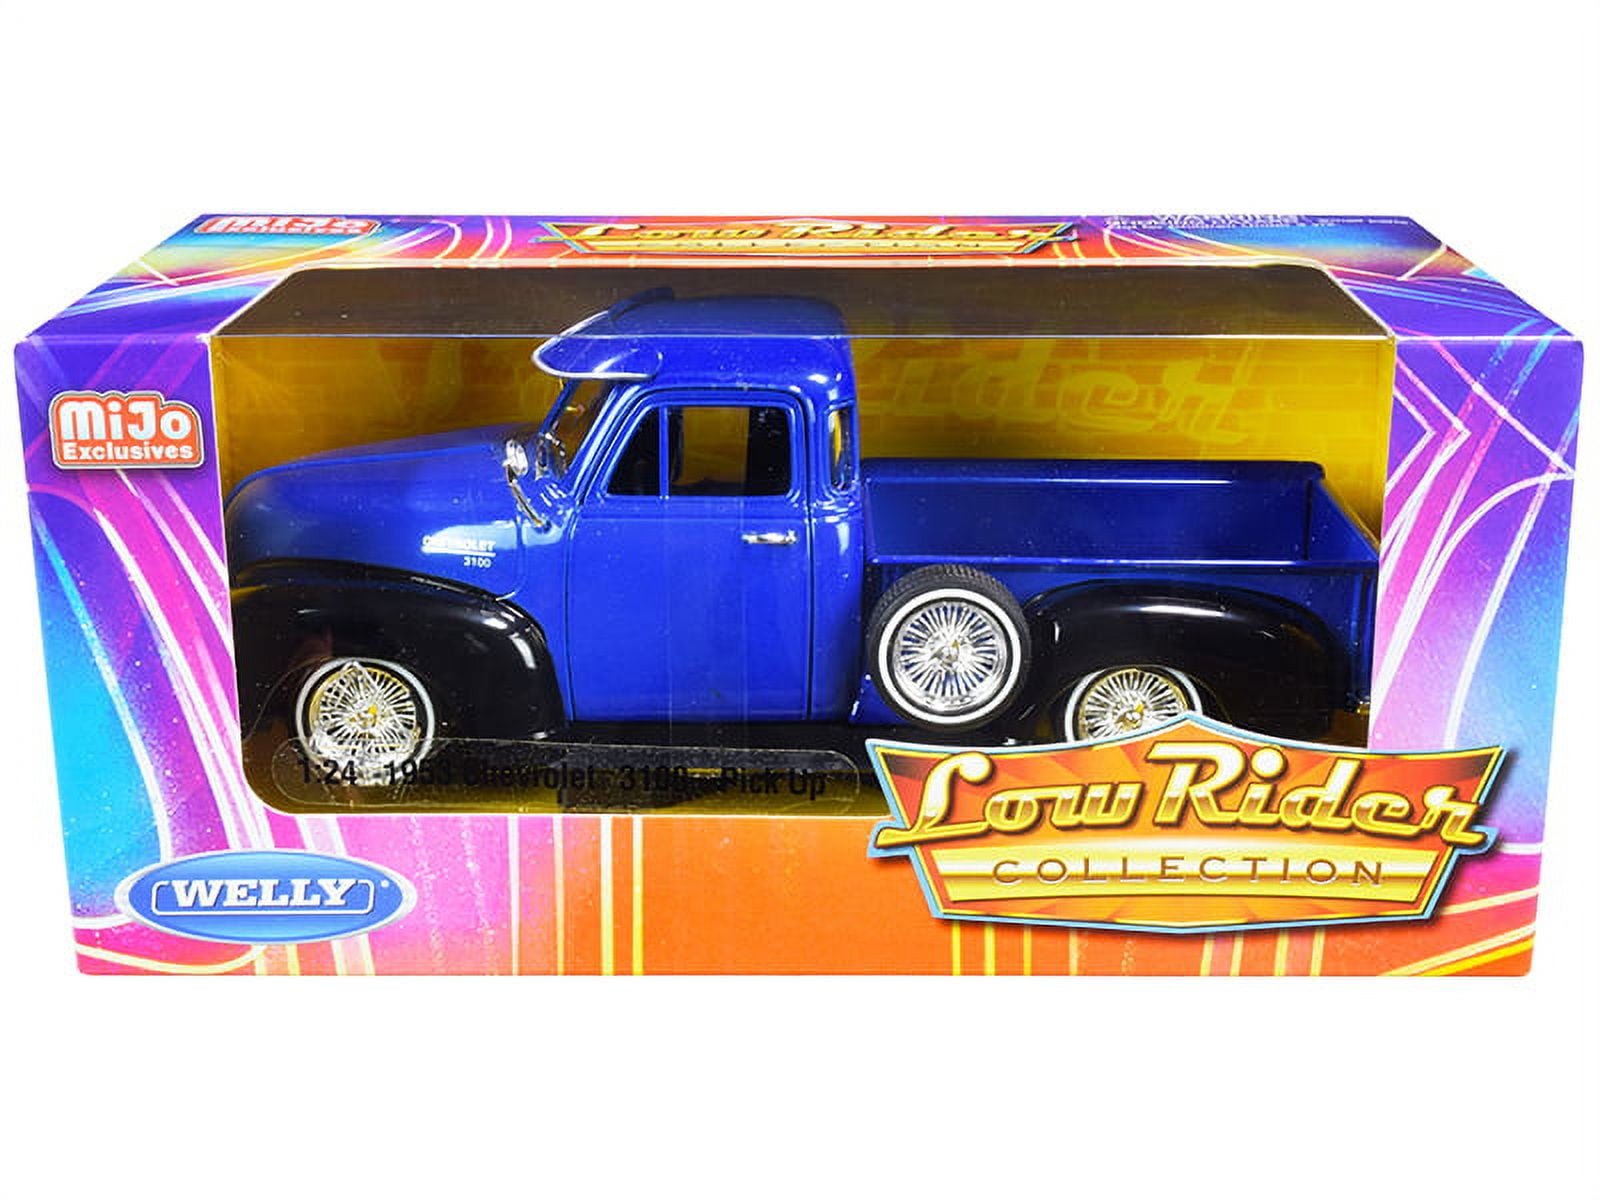 22087LRW-BL 1953 Chevrolet 3100 Pickup Truck Low Rider Collection 1 by 24 Scale Diecast Model Car, Blue & Black -  WELLY